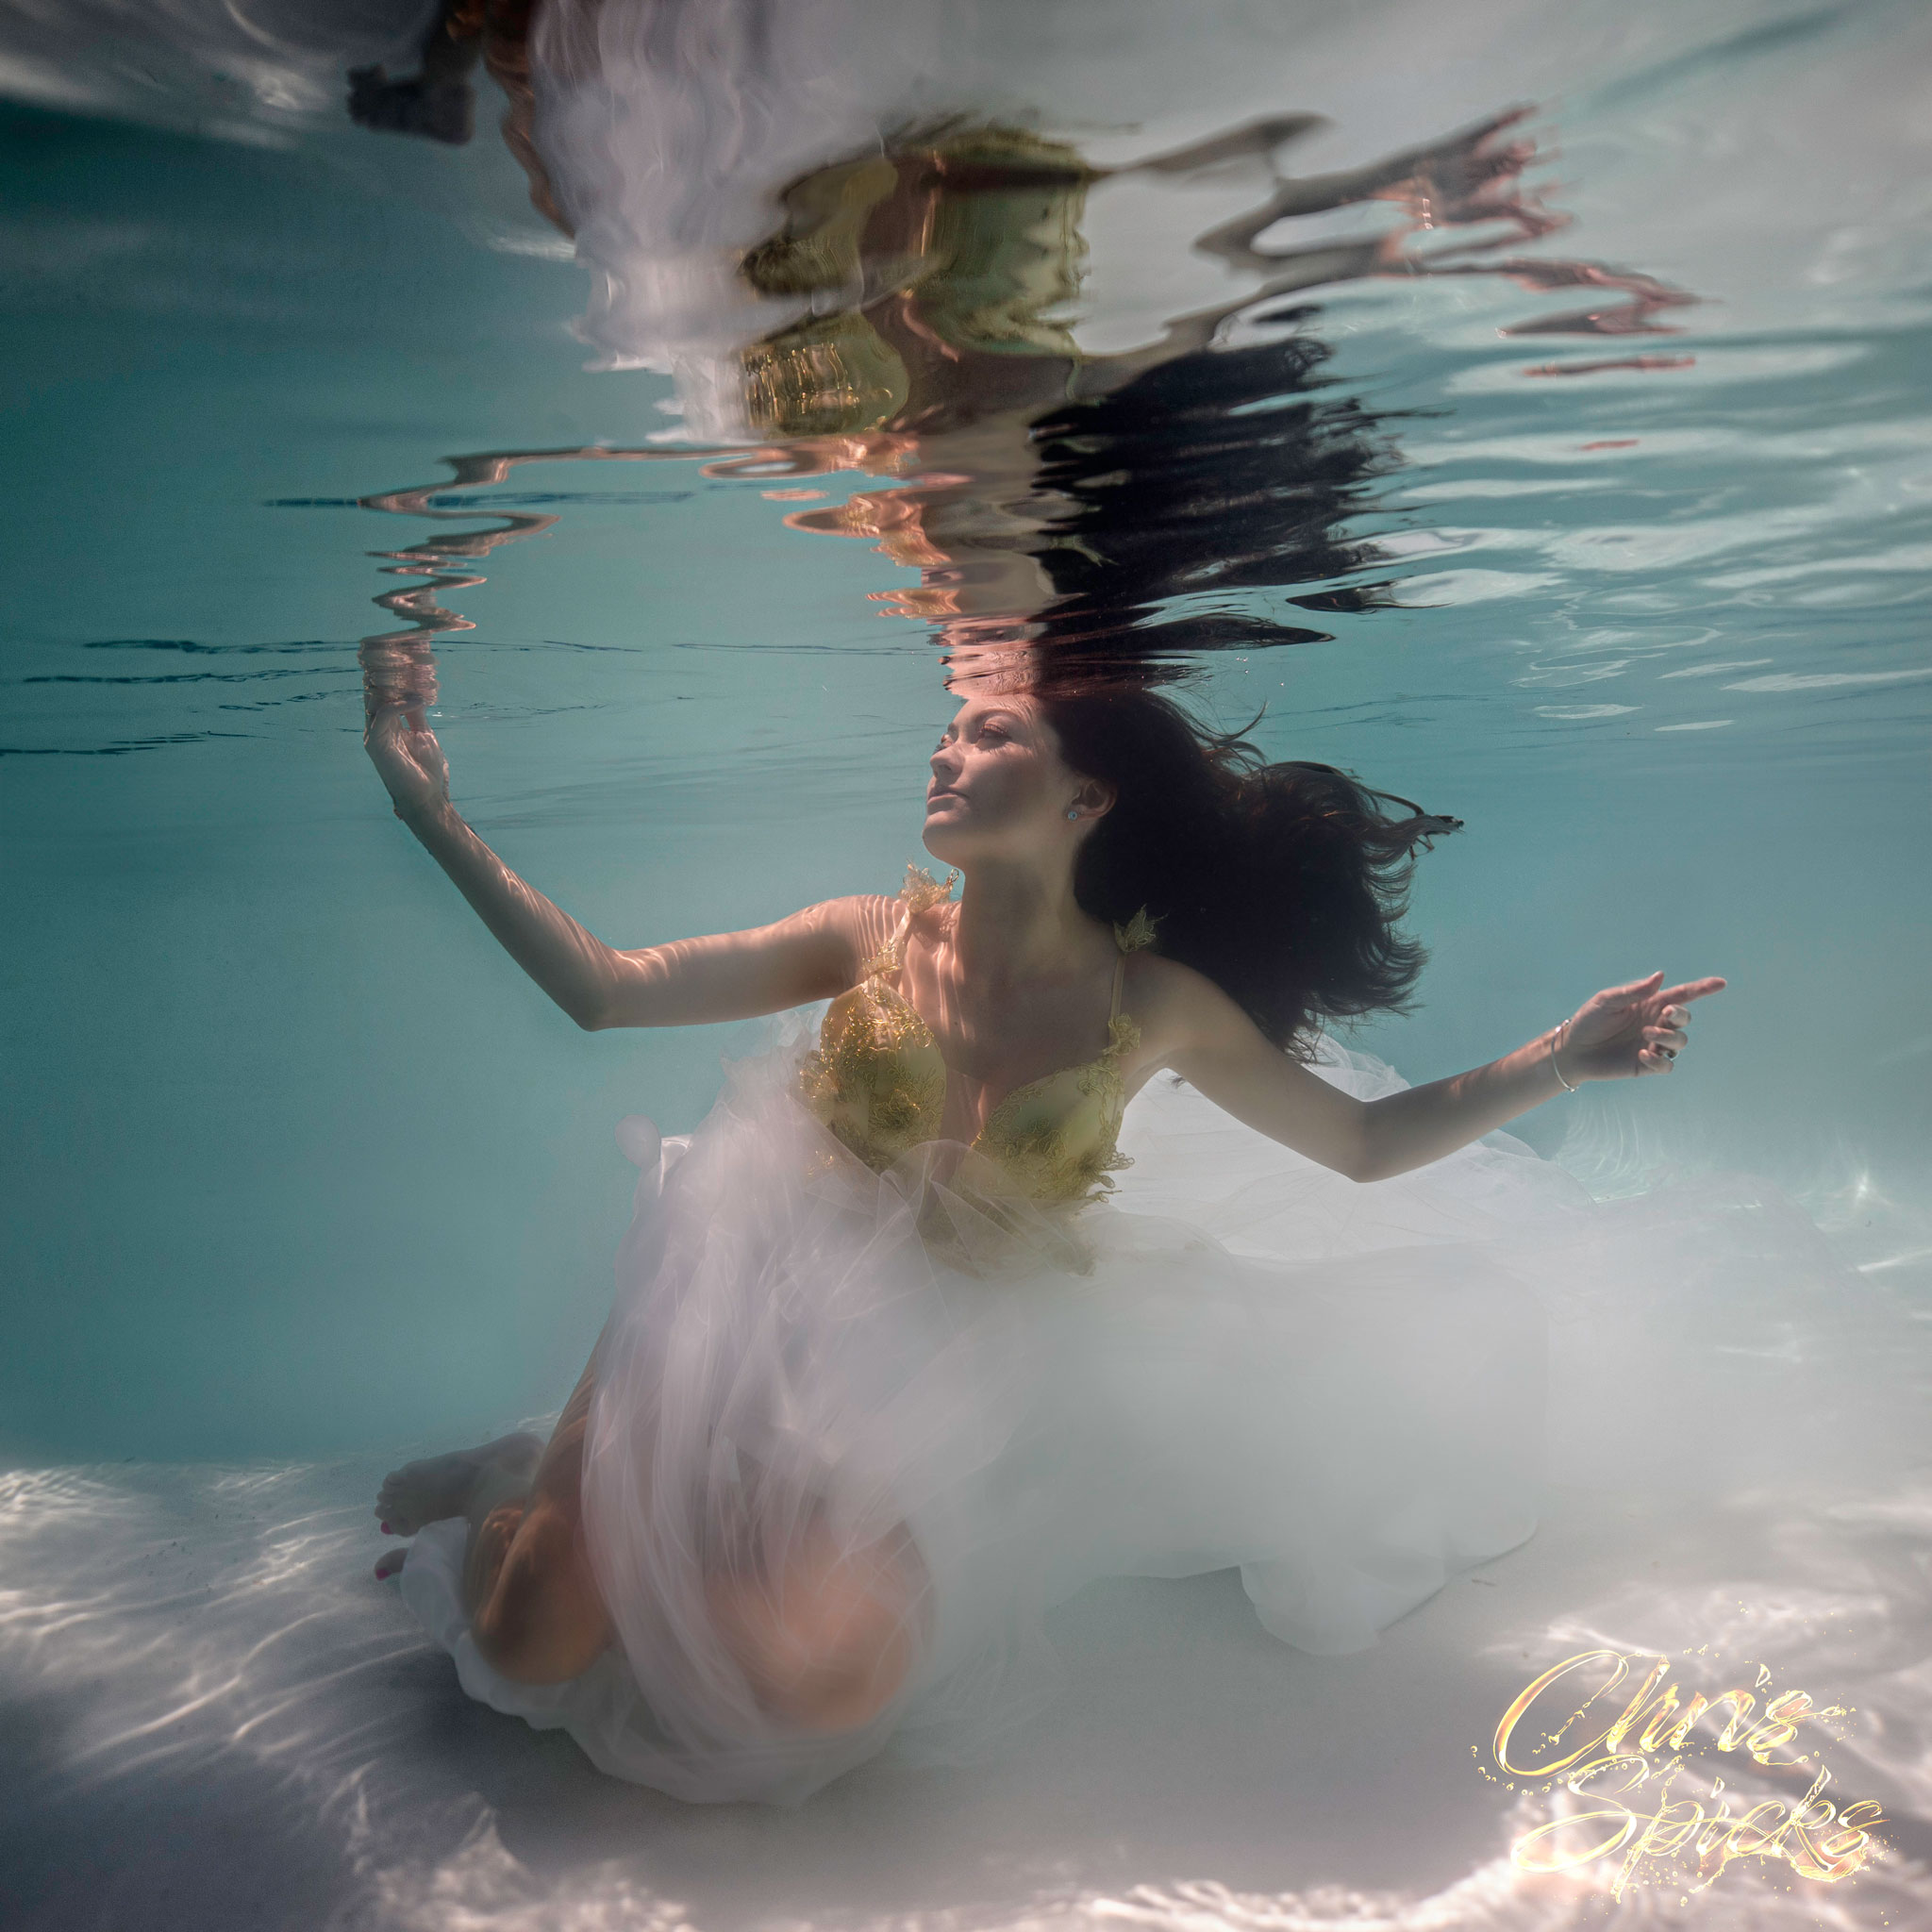 A woman in a flowing white dress and gold bodice is submerged underwater, her hair floating around her as she reaches upward.